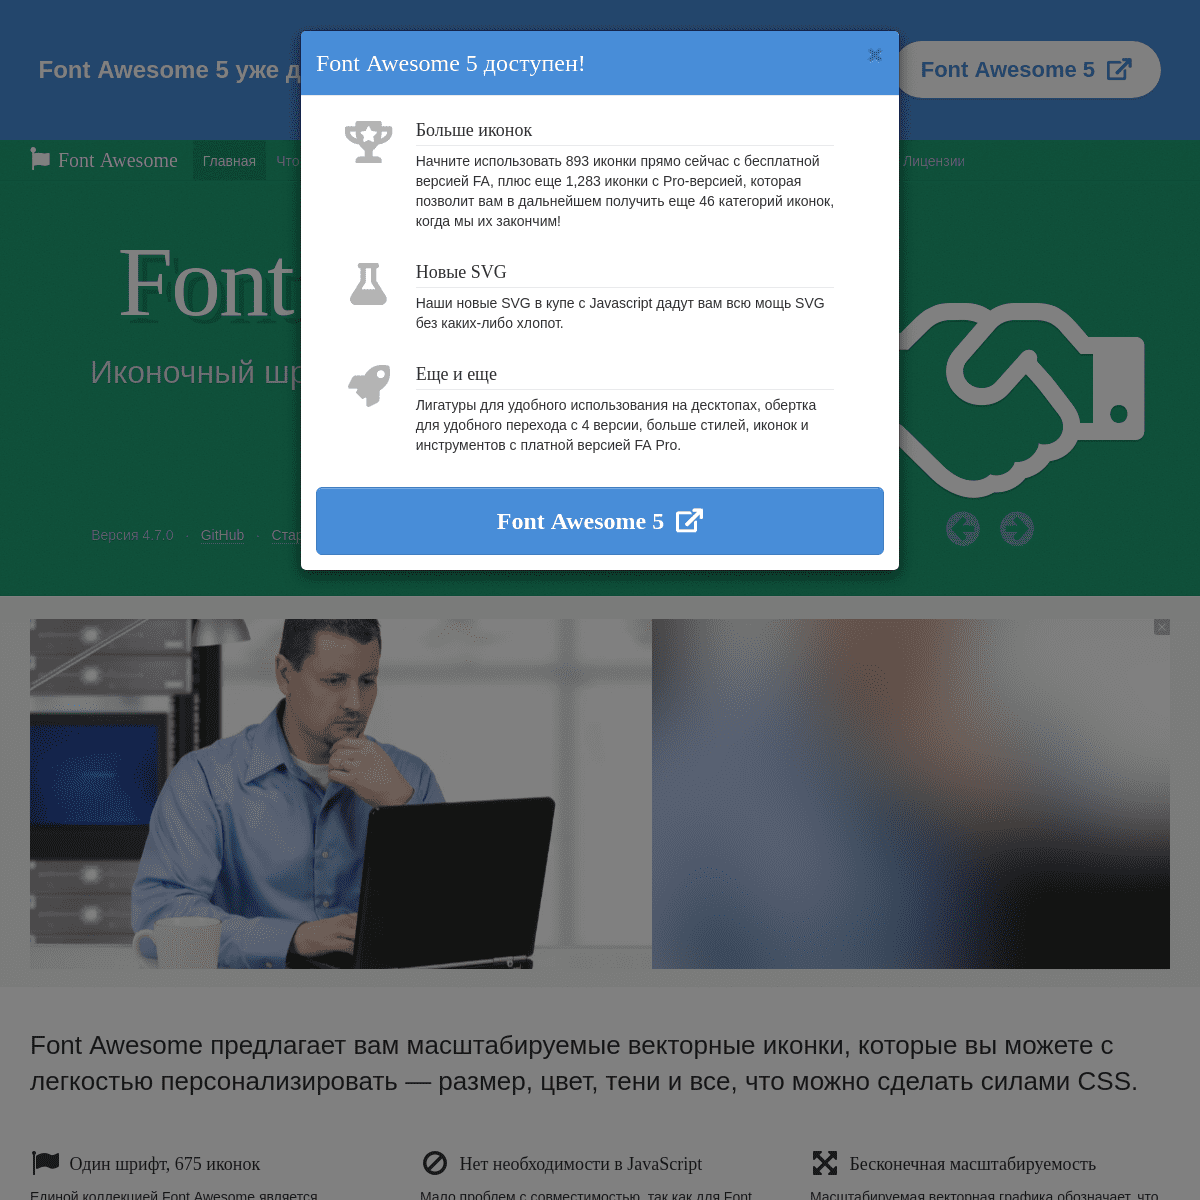 A complete backup of fontawesome.ru